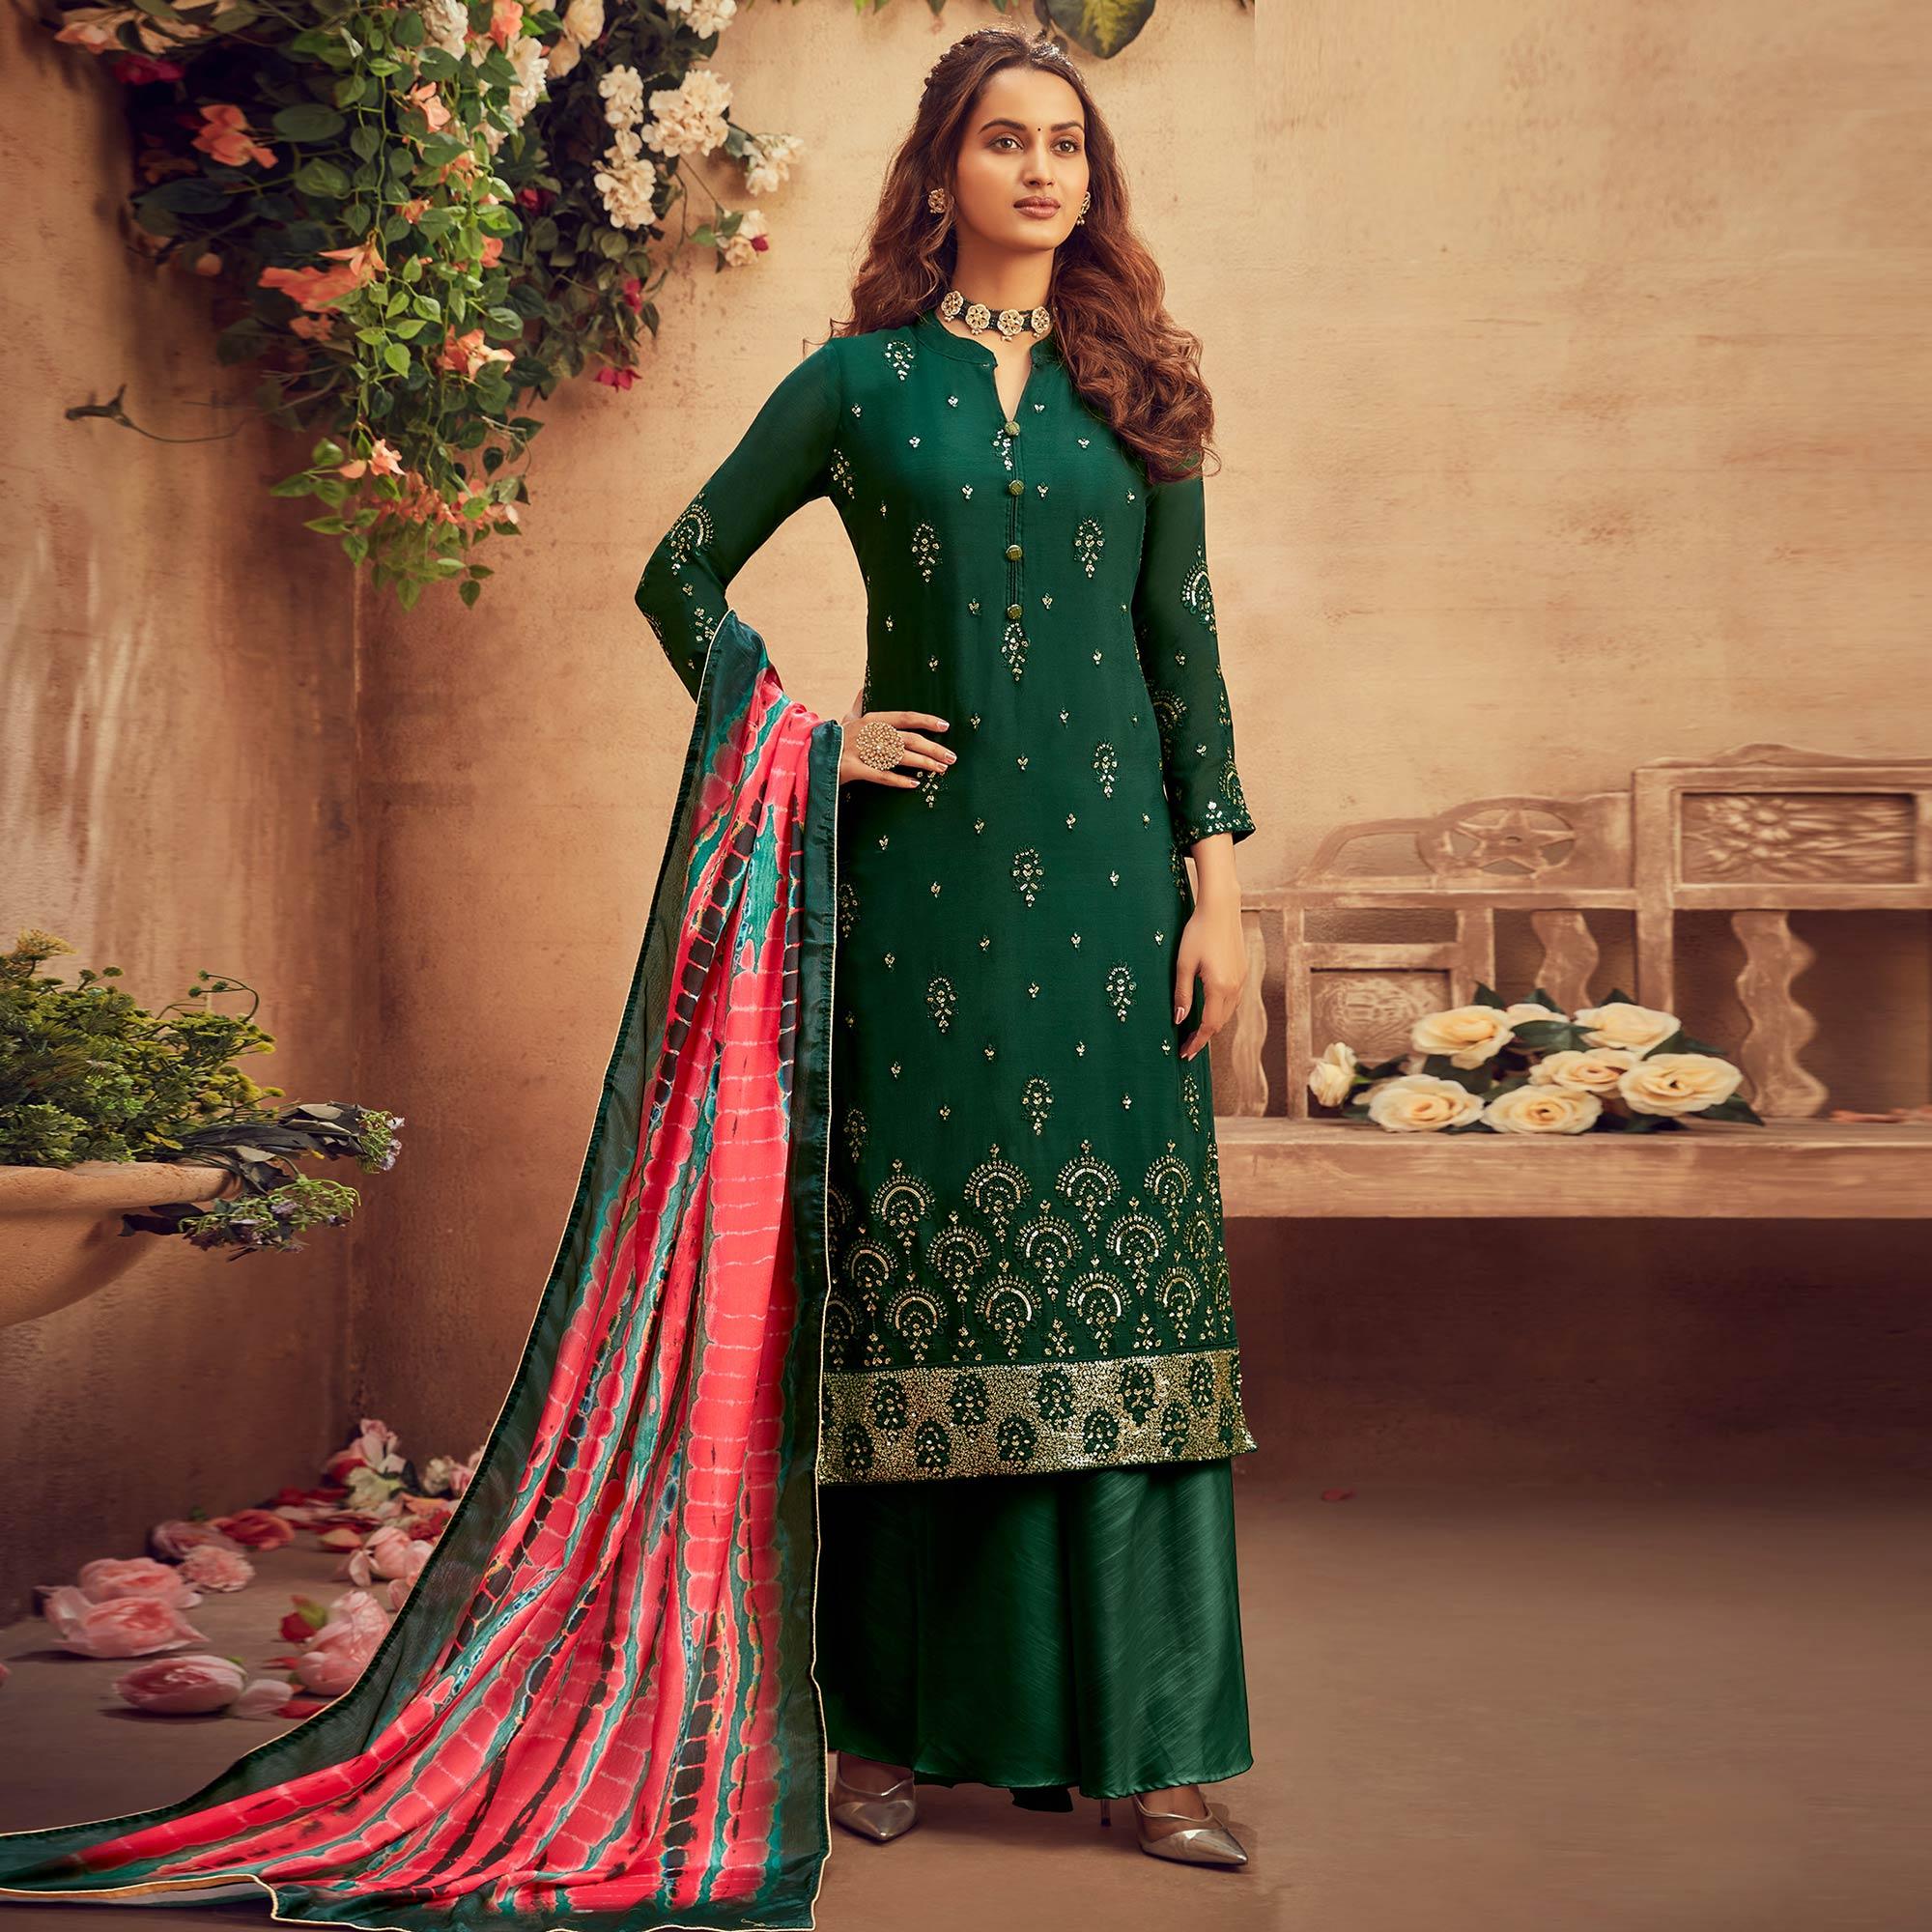 Ravishing Green Colored Embroidered Designer Partywear Heavy Faux Georgette Suit - Peachmode